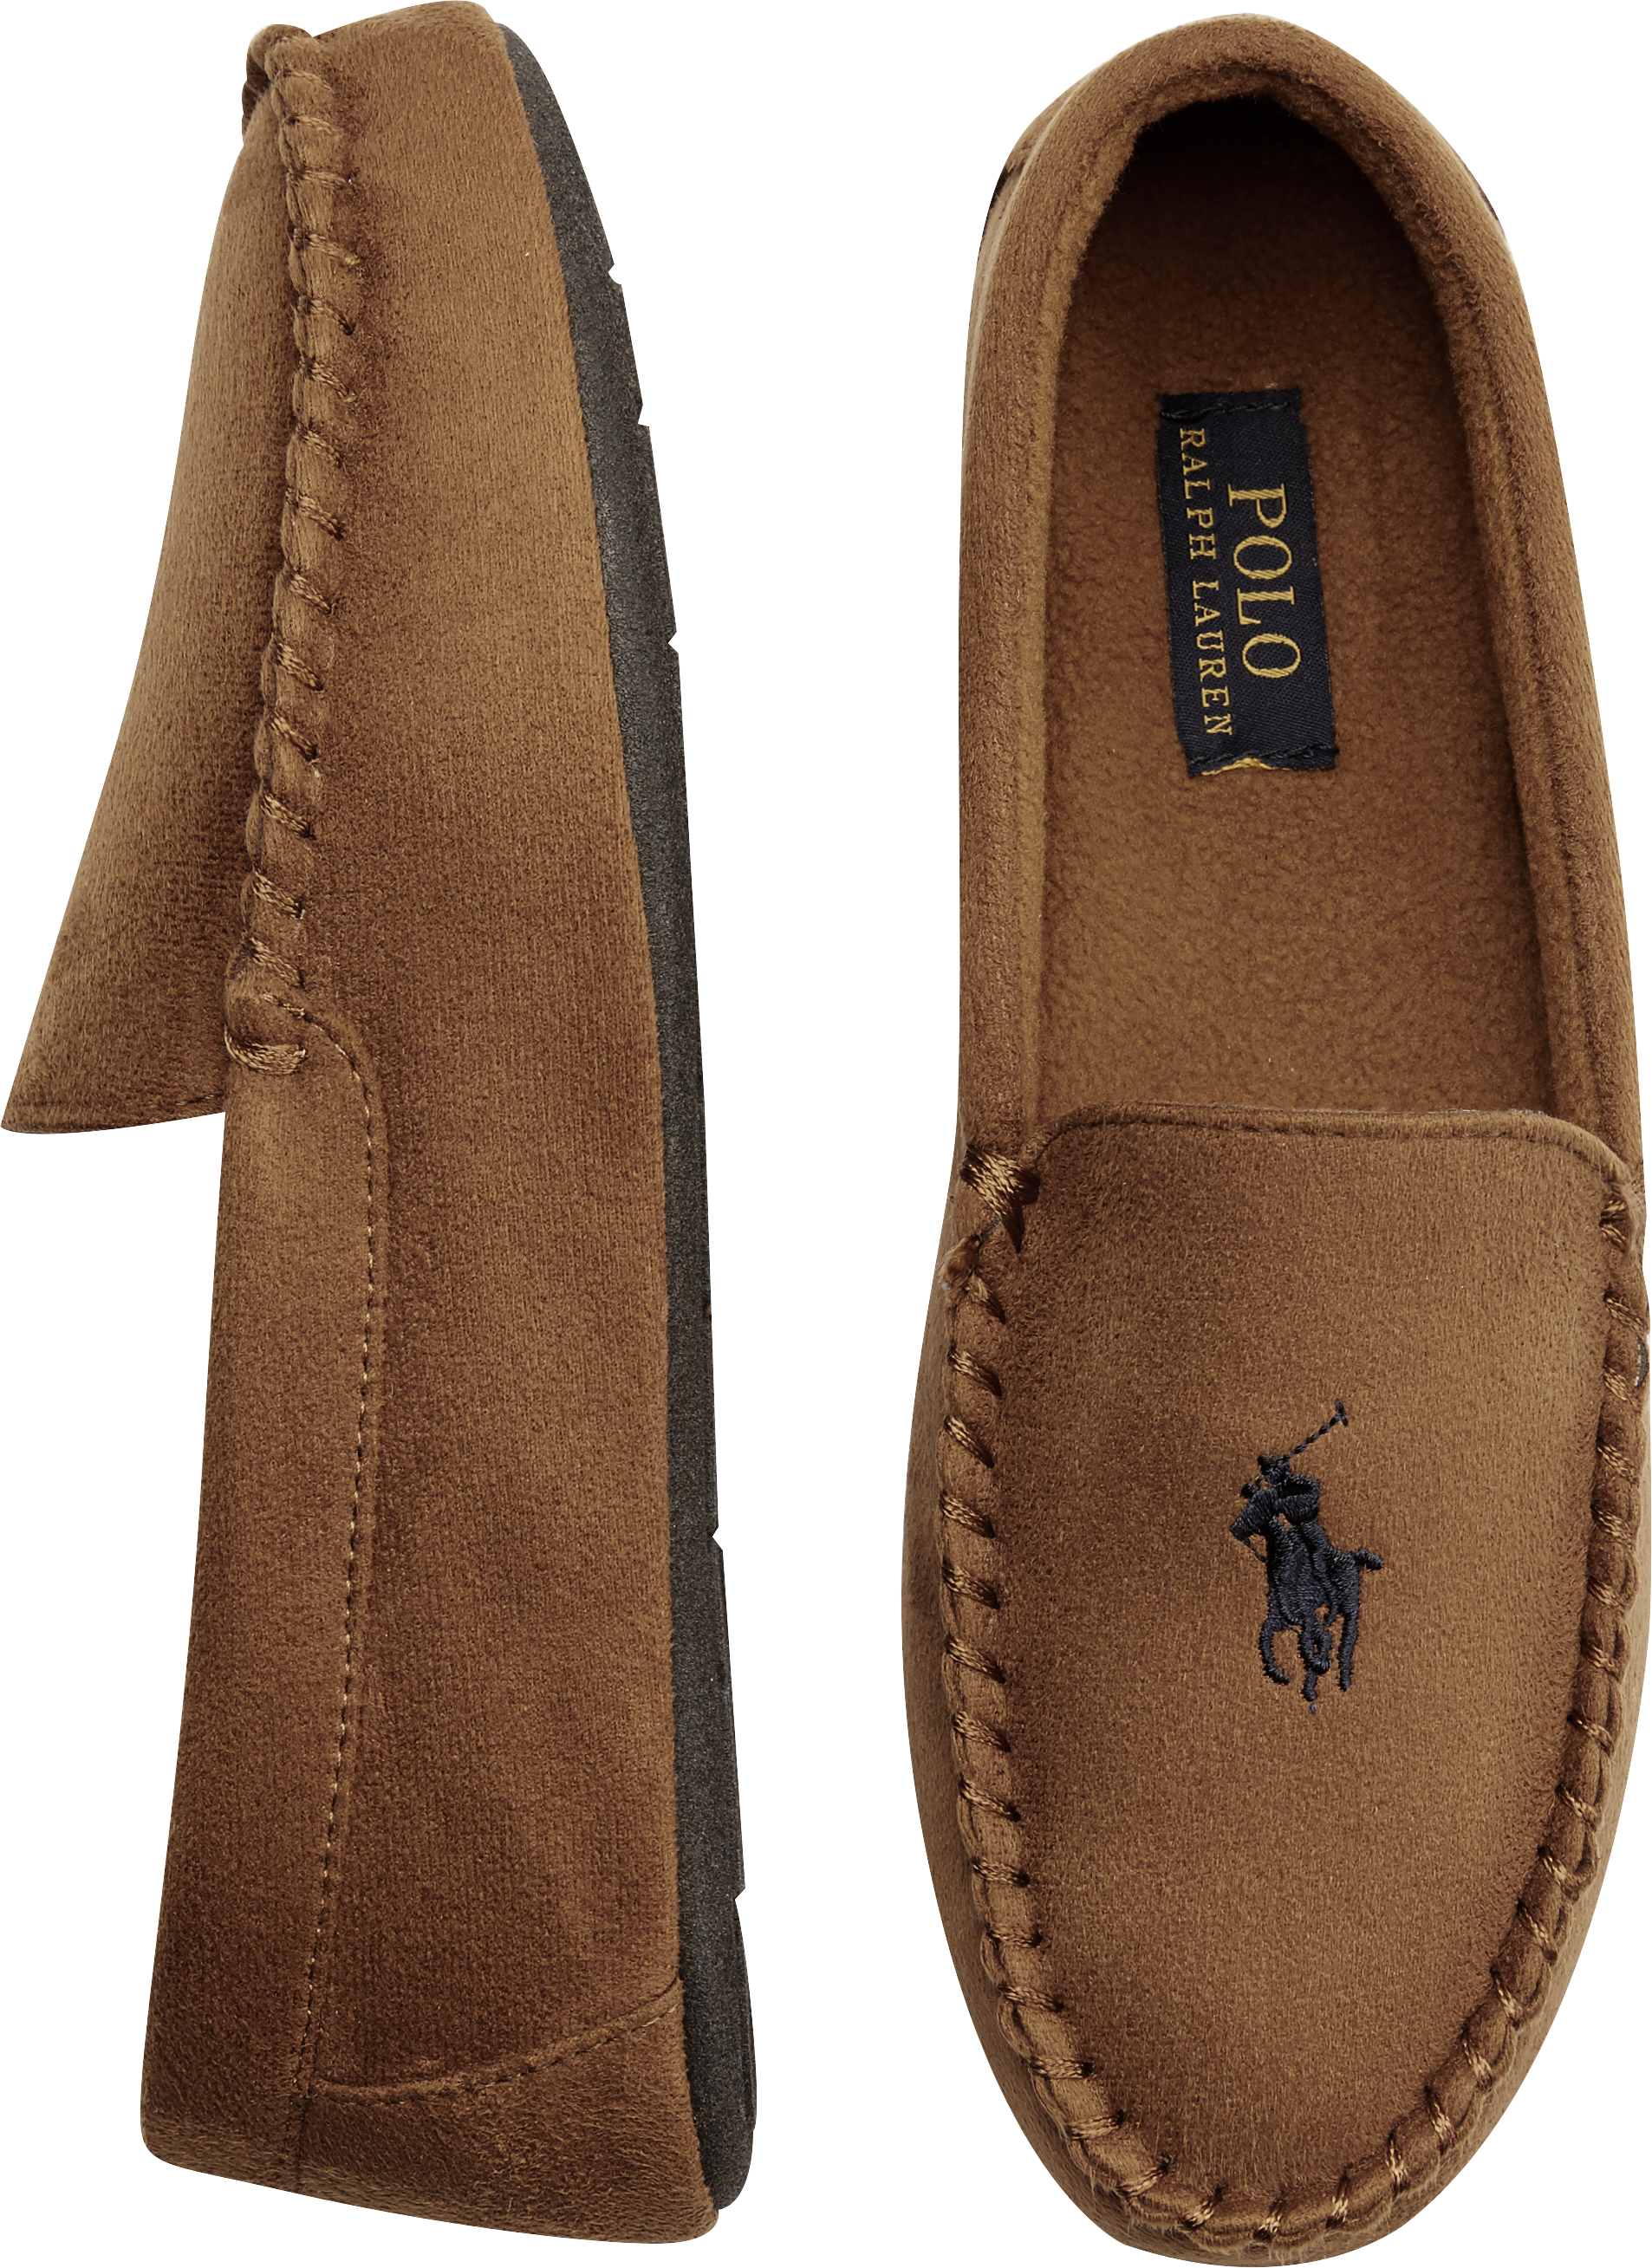 tan moccasin slippers